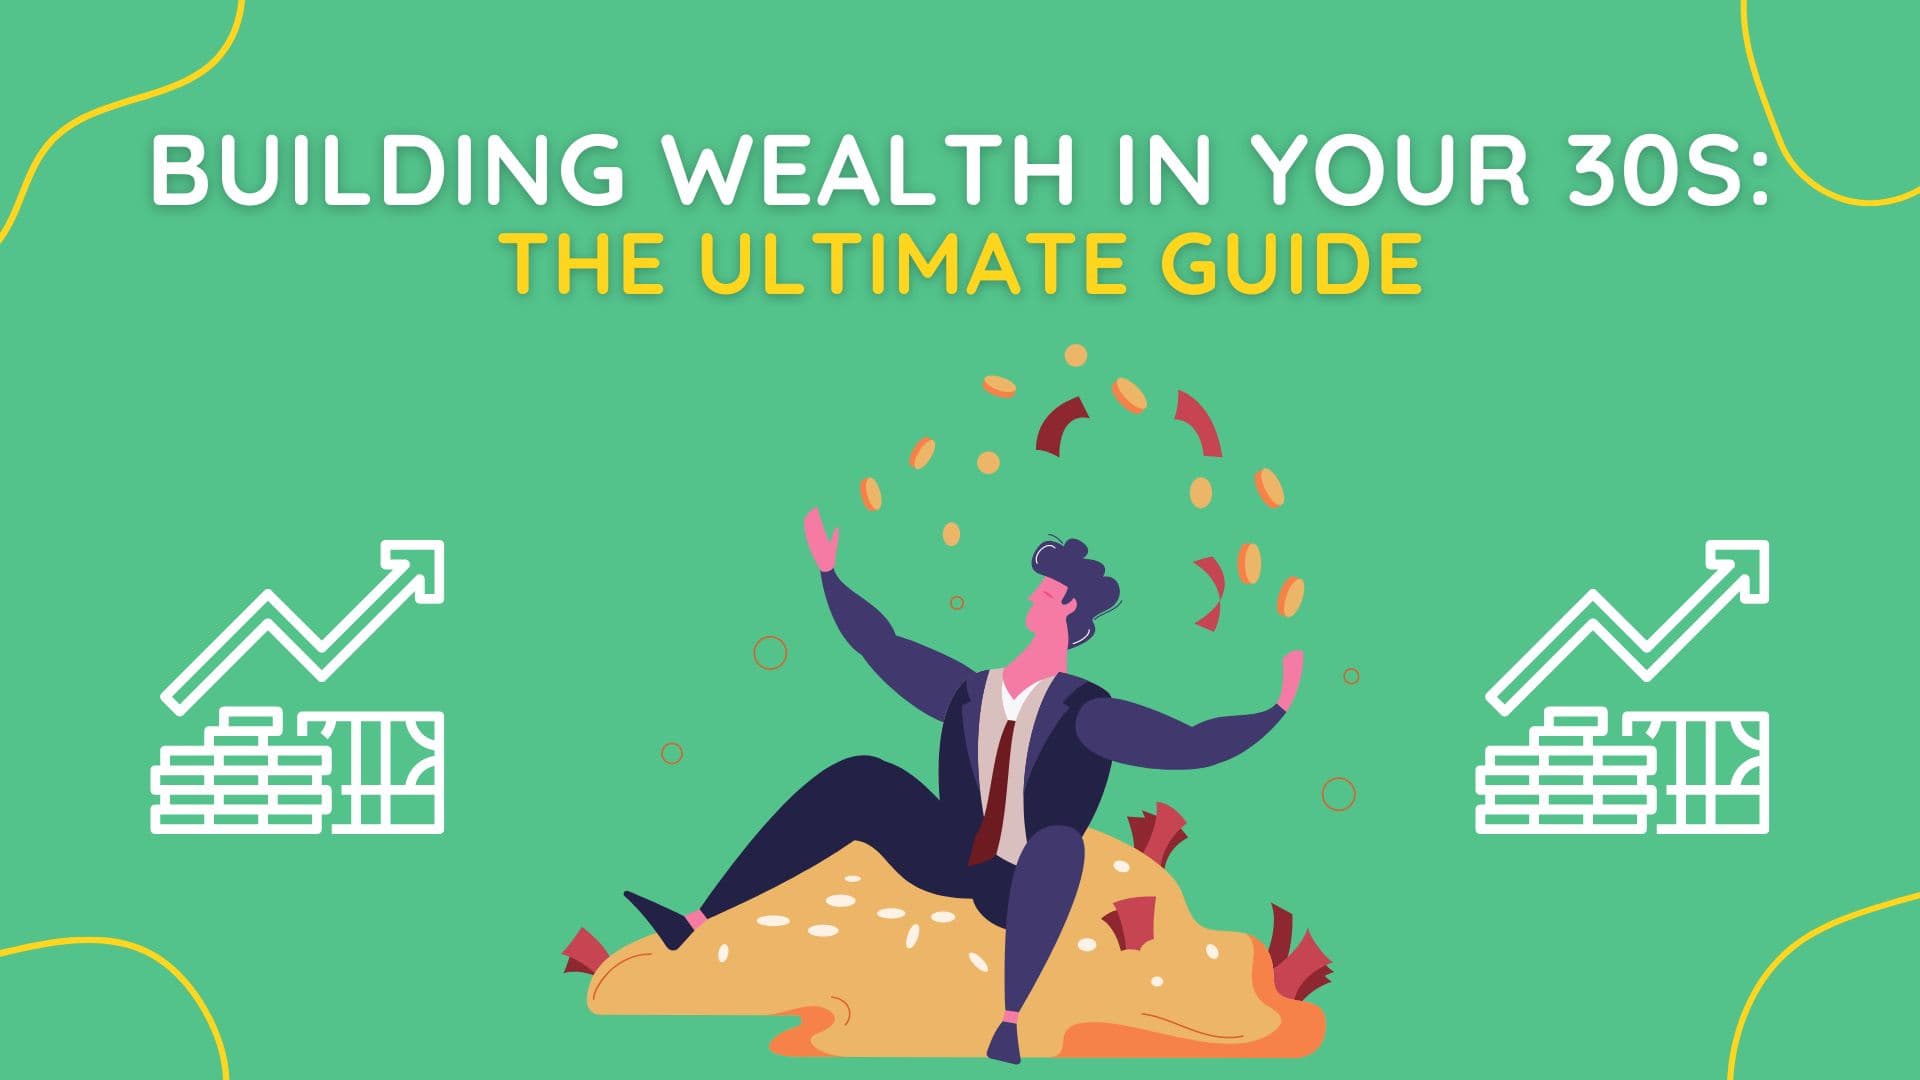 How To Build Wealth In Your 30s The Ultimate Guide Up the Gains